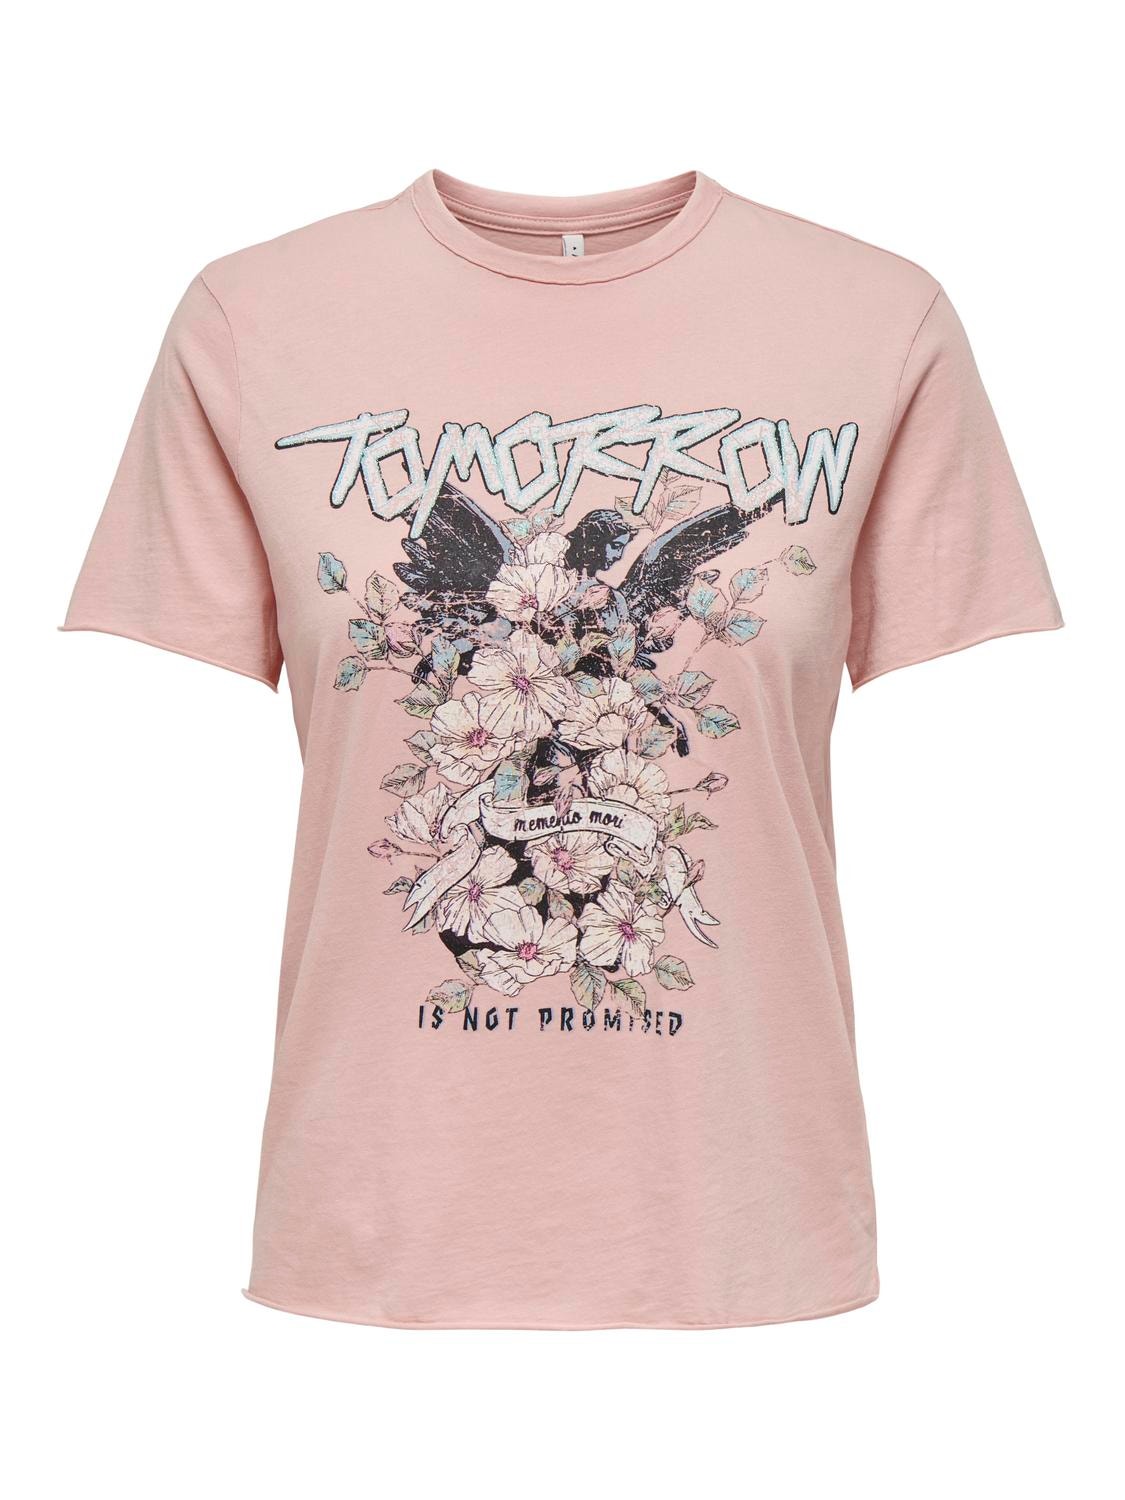 ONLY O-neck t-shirt with print -Silver Pink - 15307412